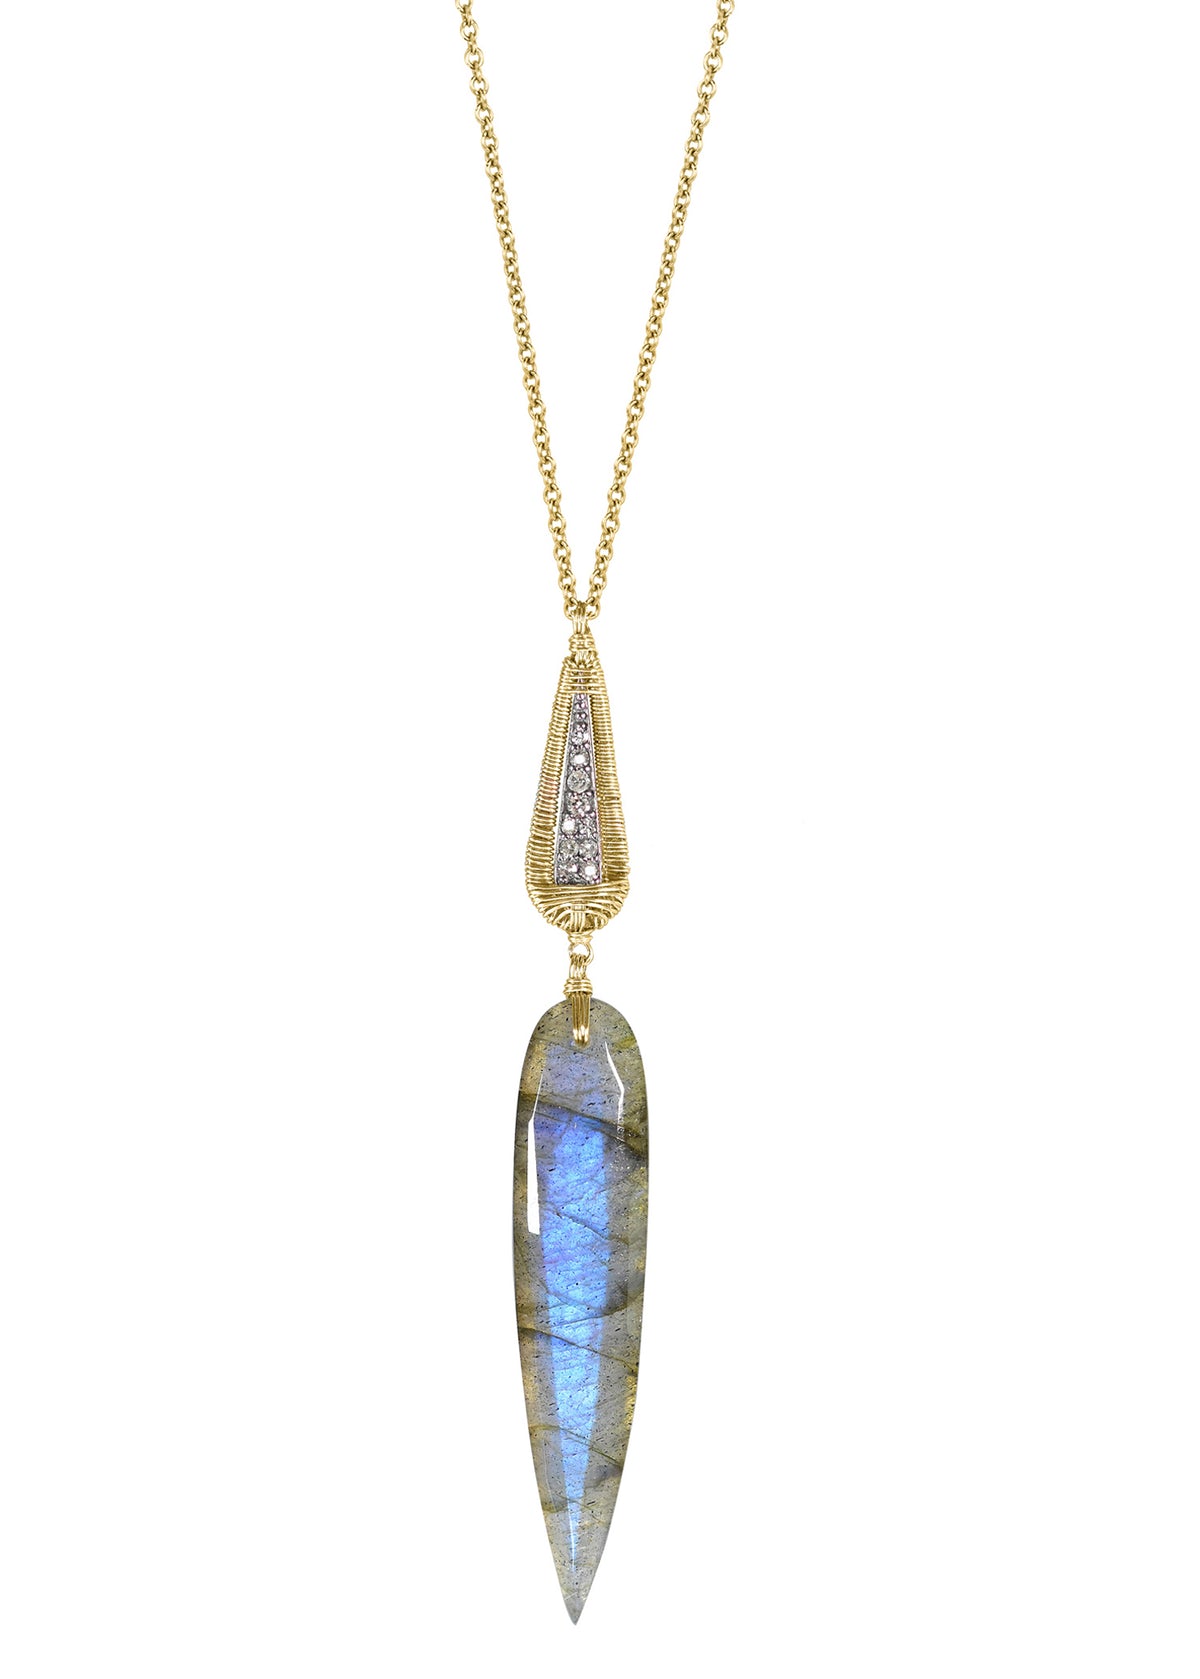 Diamond Labradorite 14k gold Sterling silver Mixed metal Special order only Necklace measures 31&quot; in length Pendant measures 2-1/2&quot; in length and 3/8&quot; in width at the widest point Handmade in our Los Angeles studio